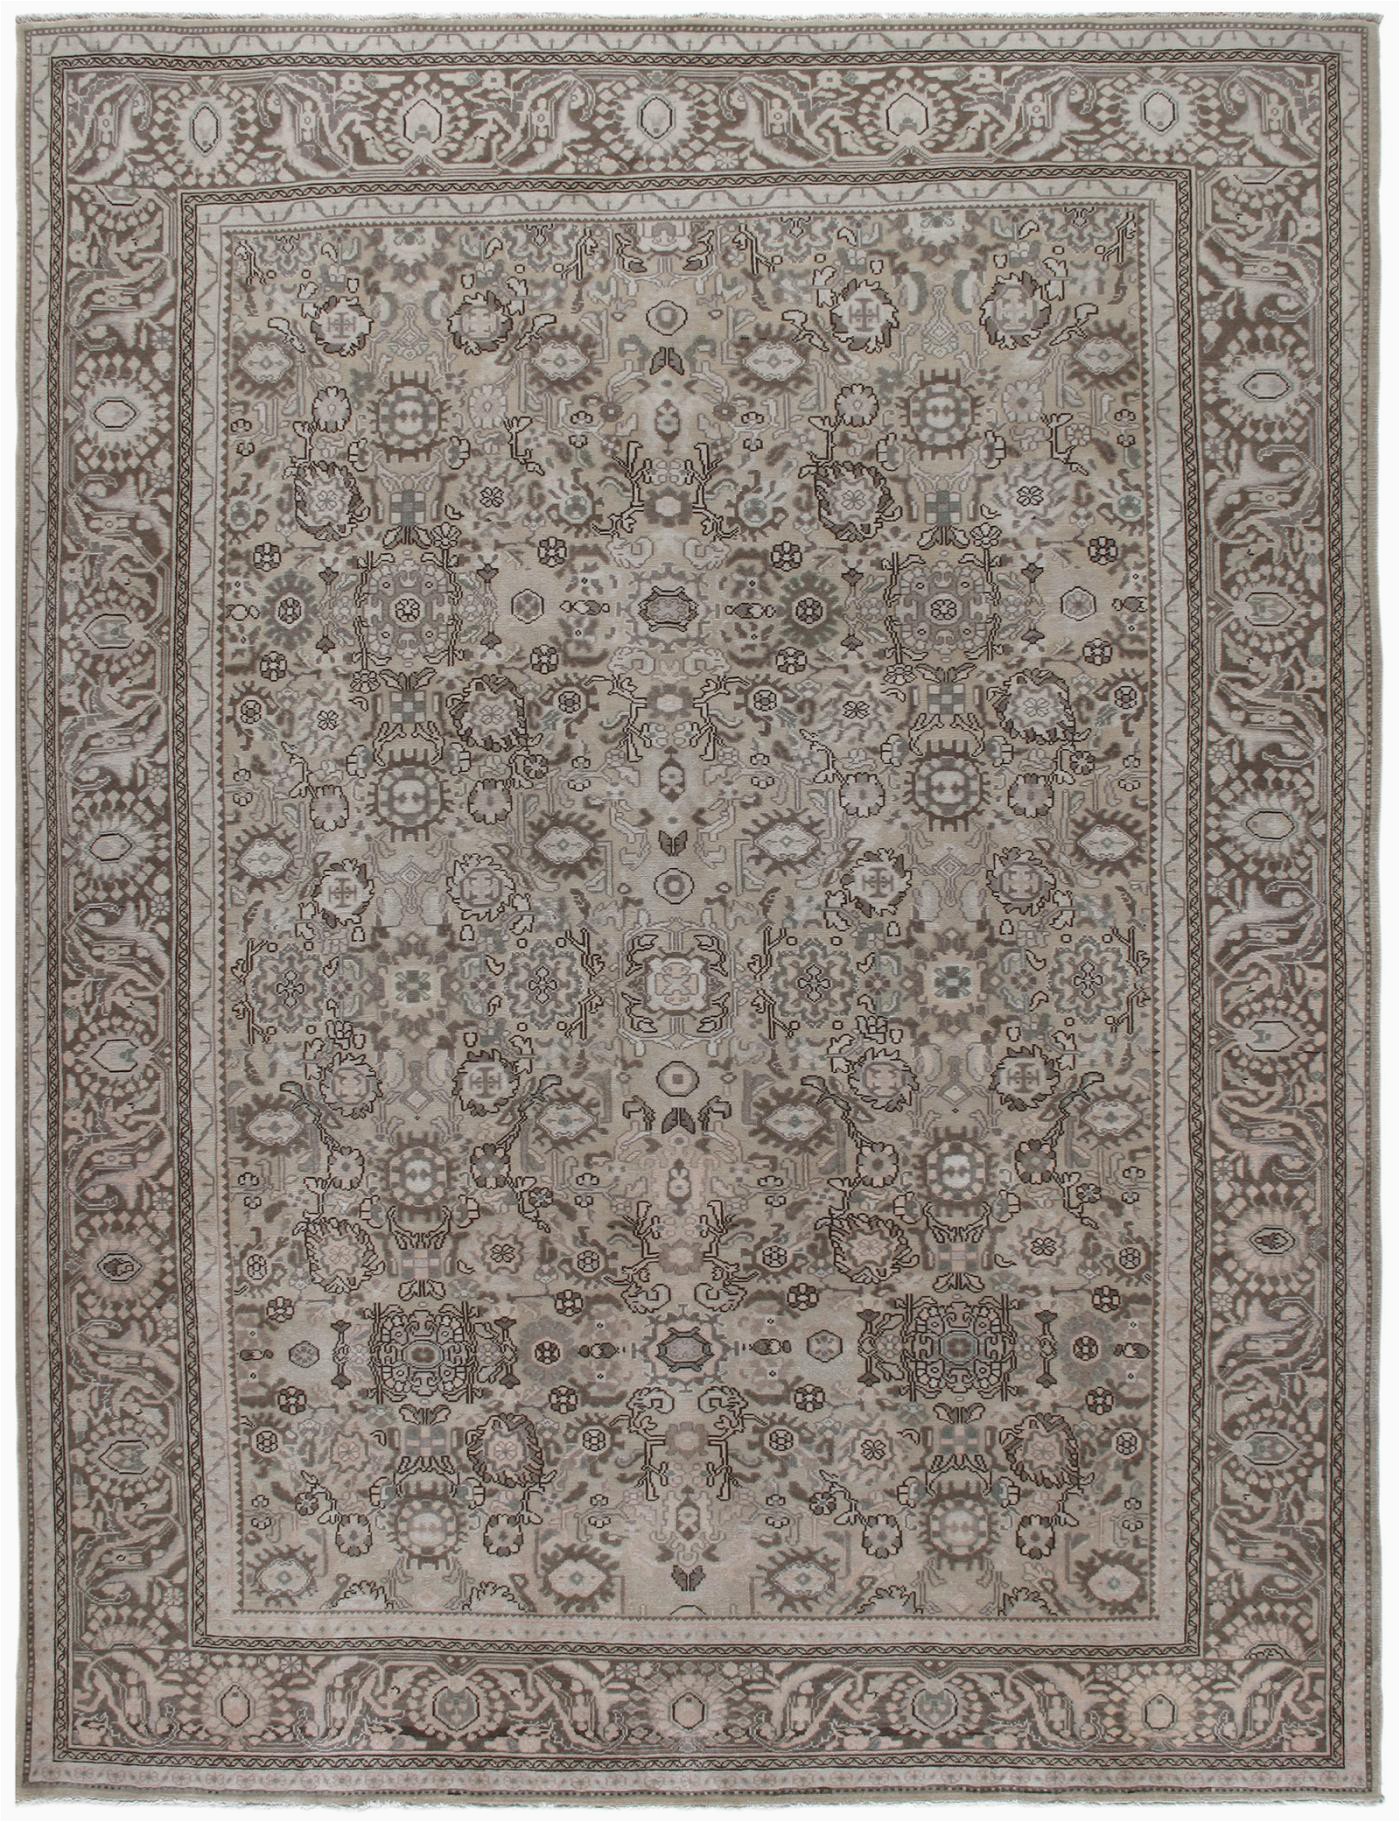 Finn Hand Knotted Rug Blue Multi Antique Persian Malayer Decorative Hand Knotted Rug In Neutral Beige and Brown